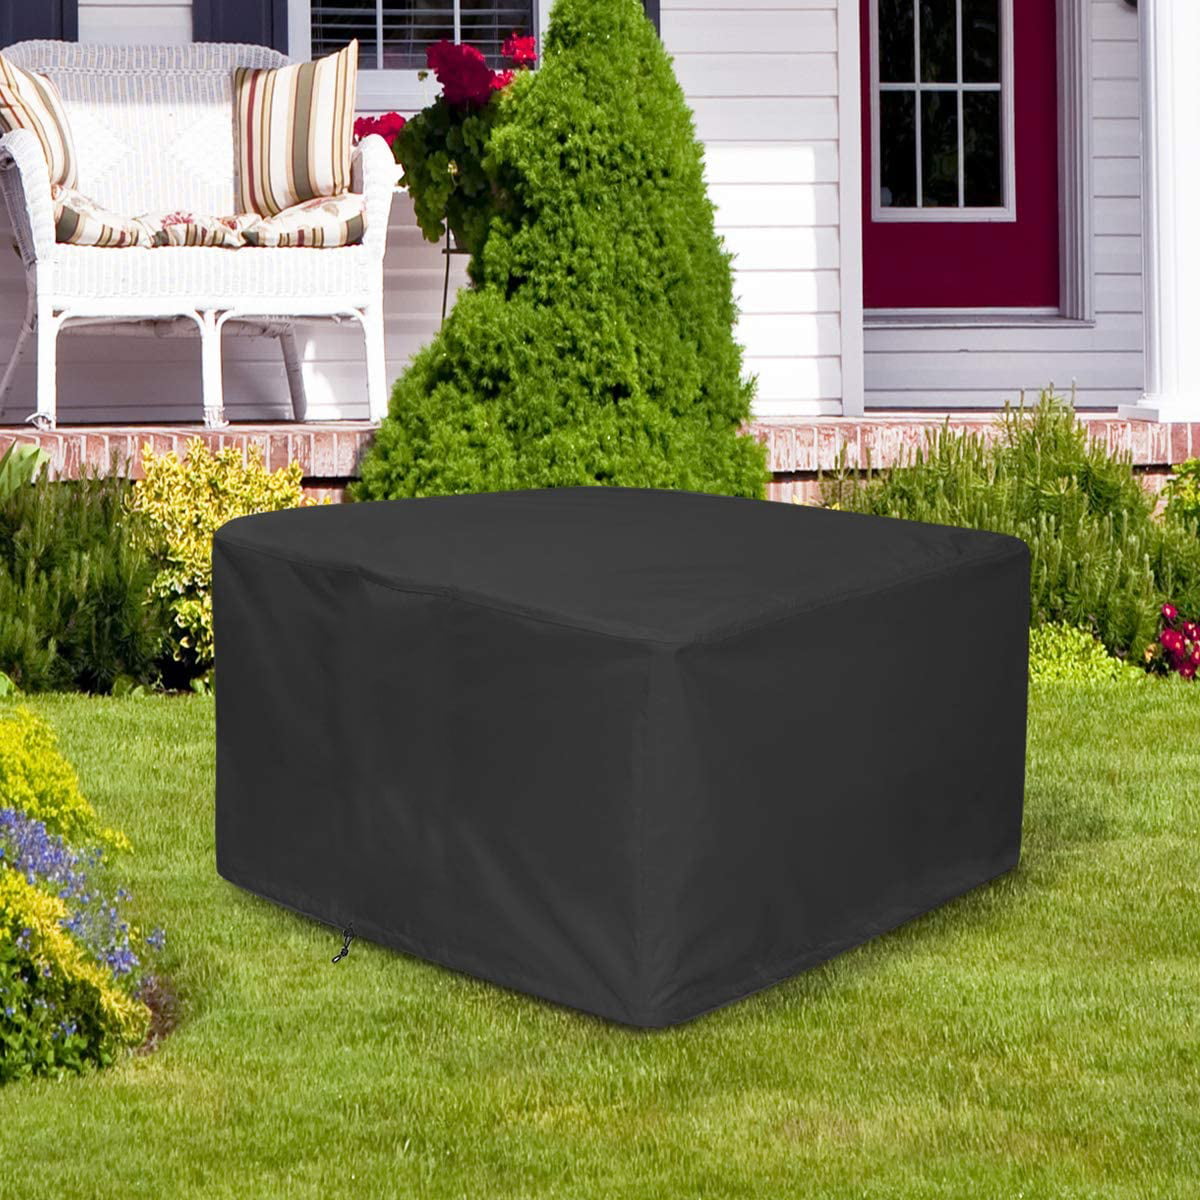 Kasla Fire Pit Table Cover Square 32 x 32 x 25 inch Black 600D Heavy Duty PVC Waterproof Windproof Outdoor Fireplace Cover for Patio Gas Firepit Furniture